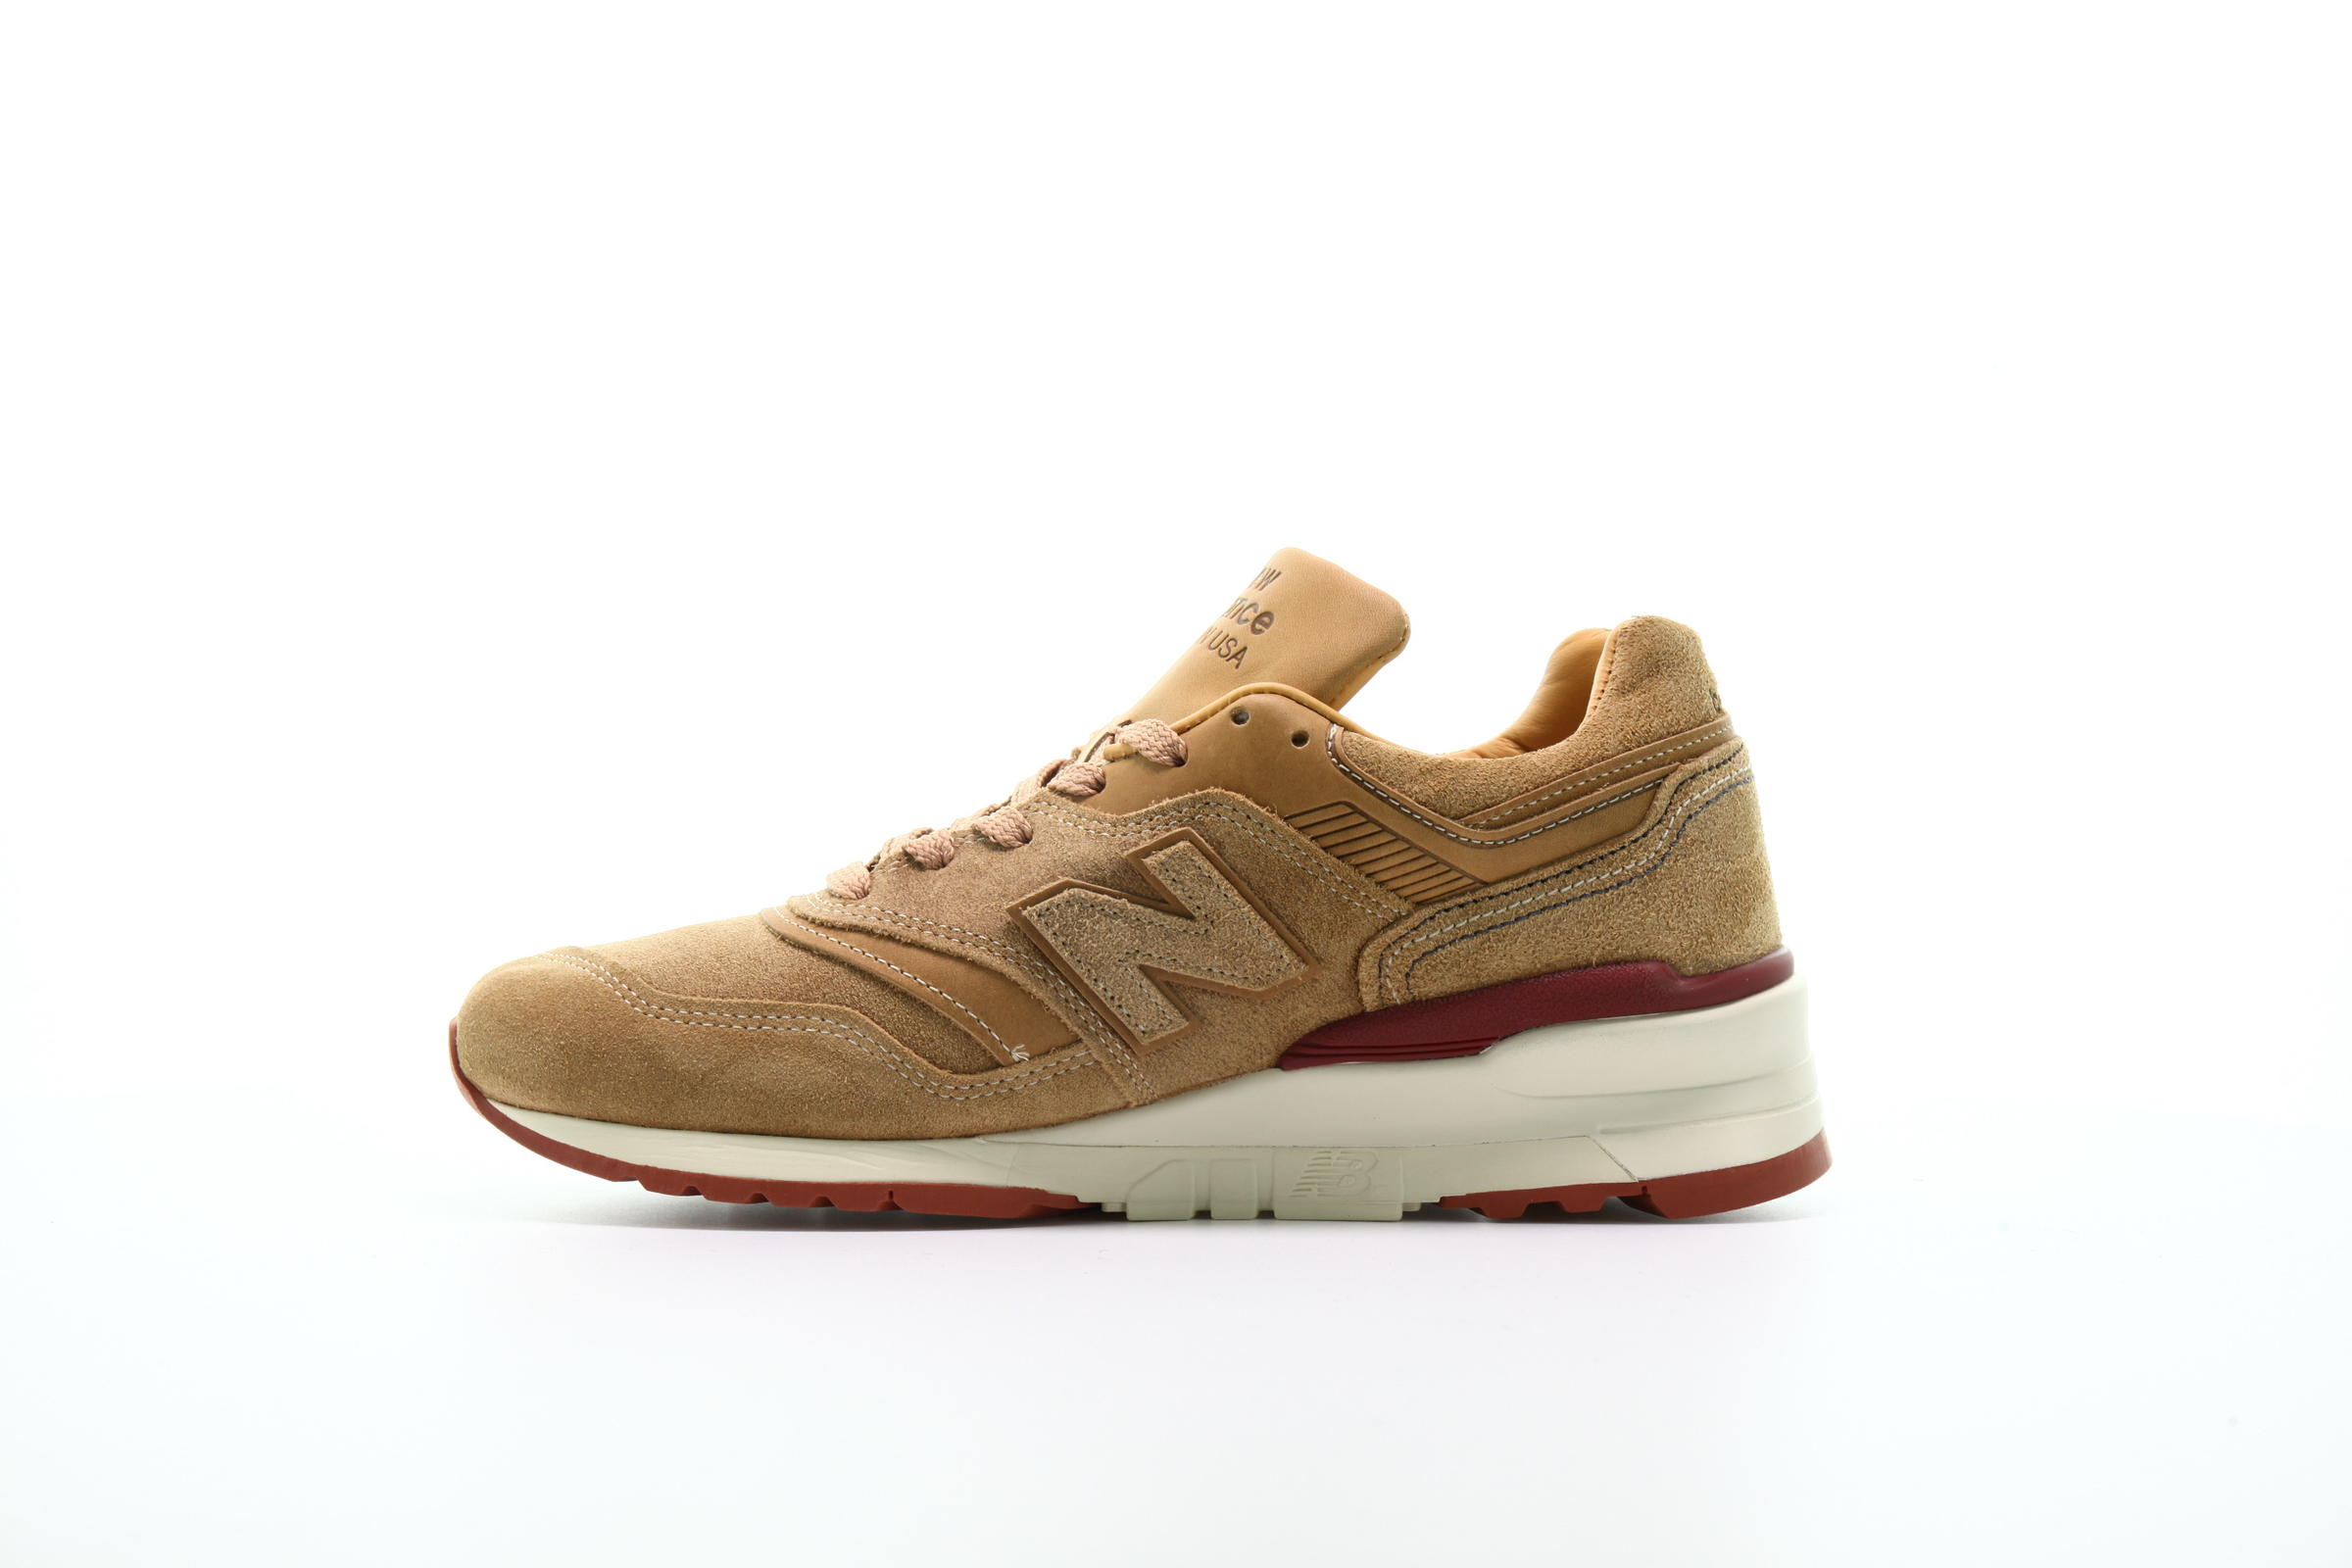 New Balance x Red Wing Shoes M 997 RW "Tan"